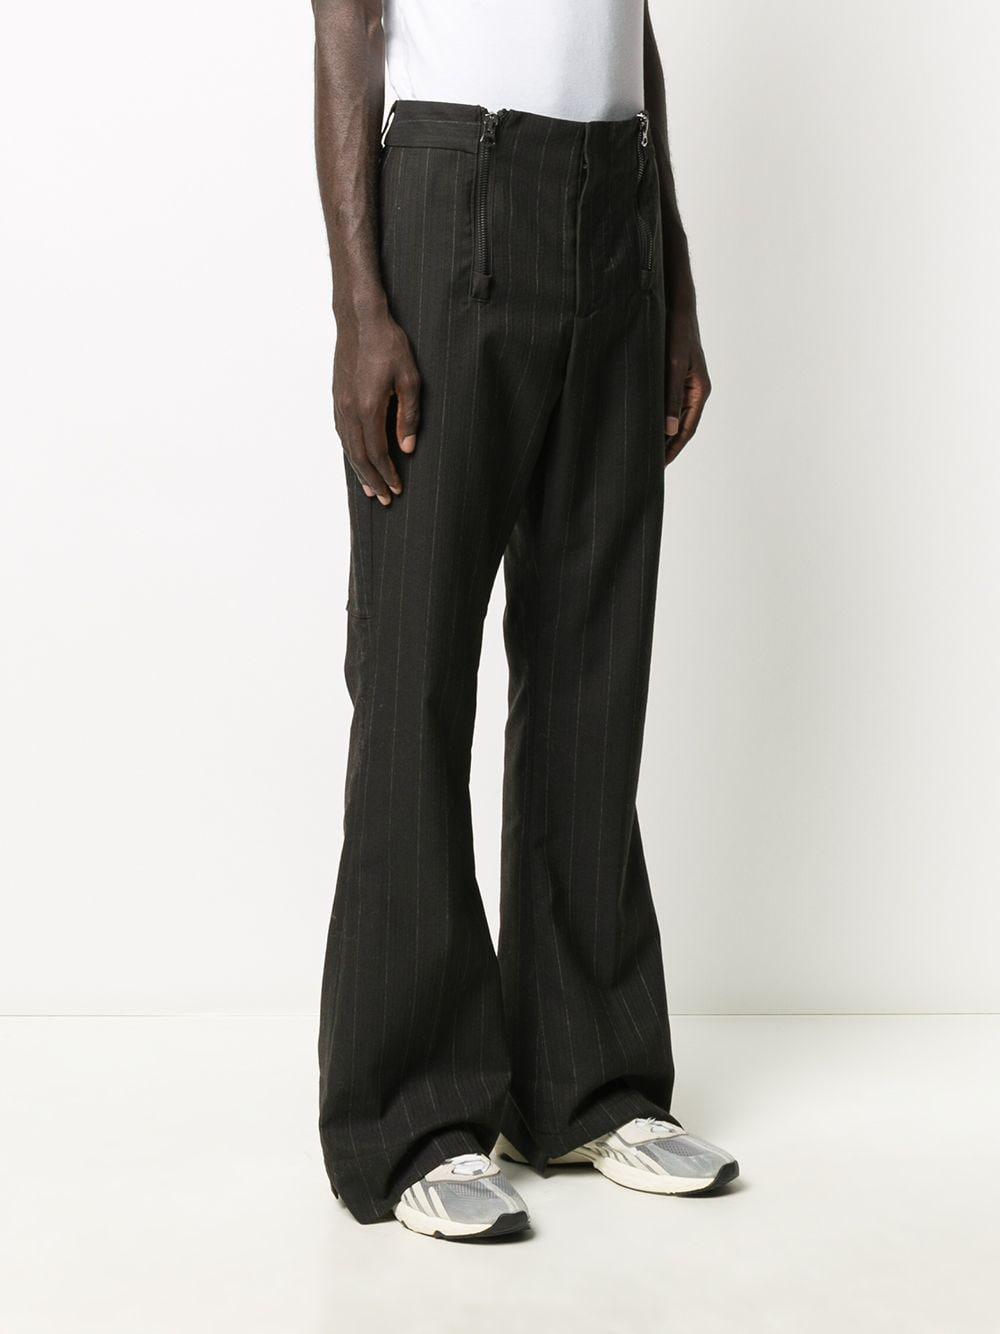 Acne Studios Cotton Pinstripe Bootcut Trousers in Brown for Men - Lyst